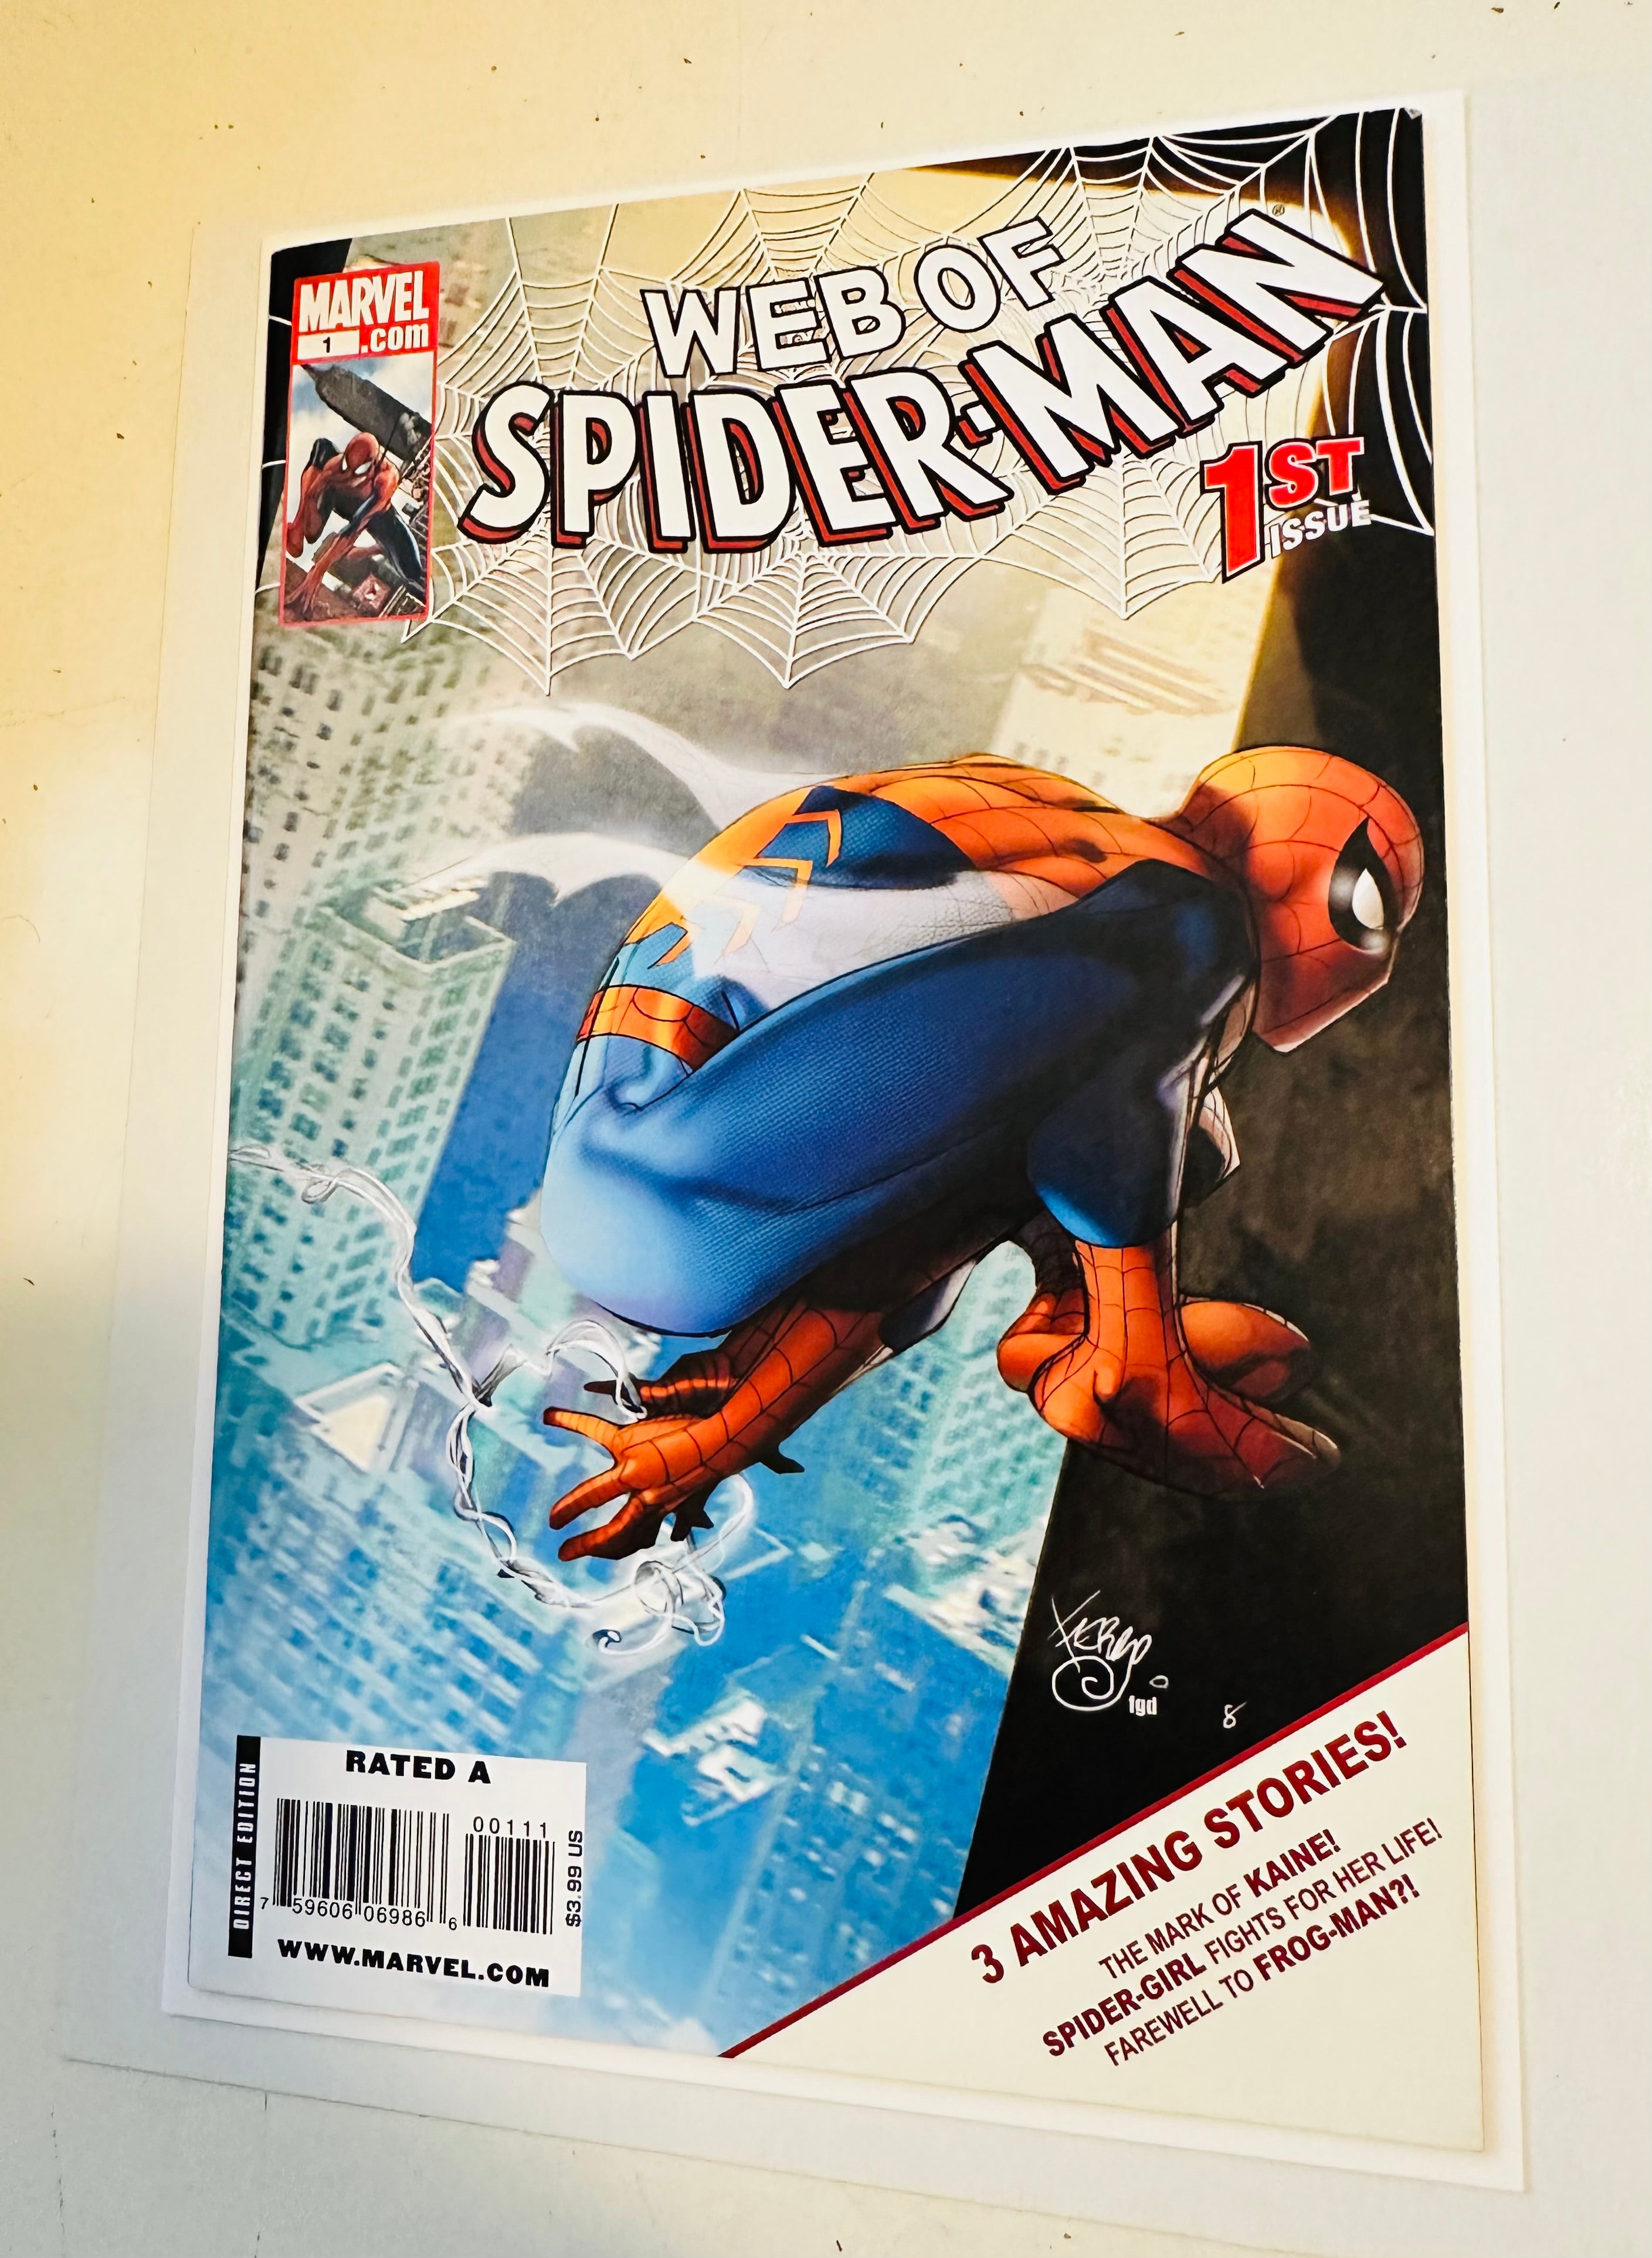 Web of Spider-Man first issue 2009